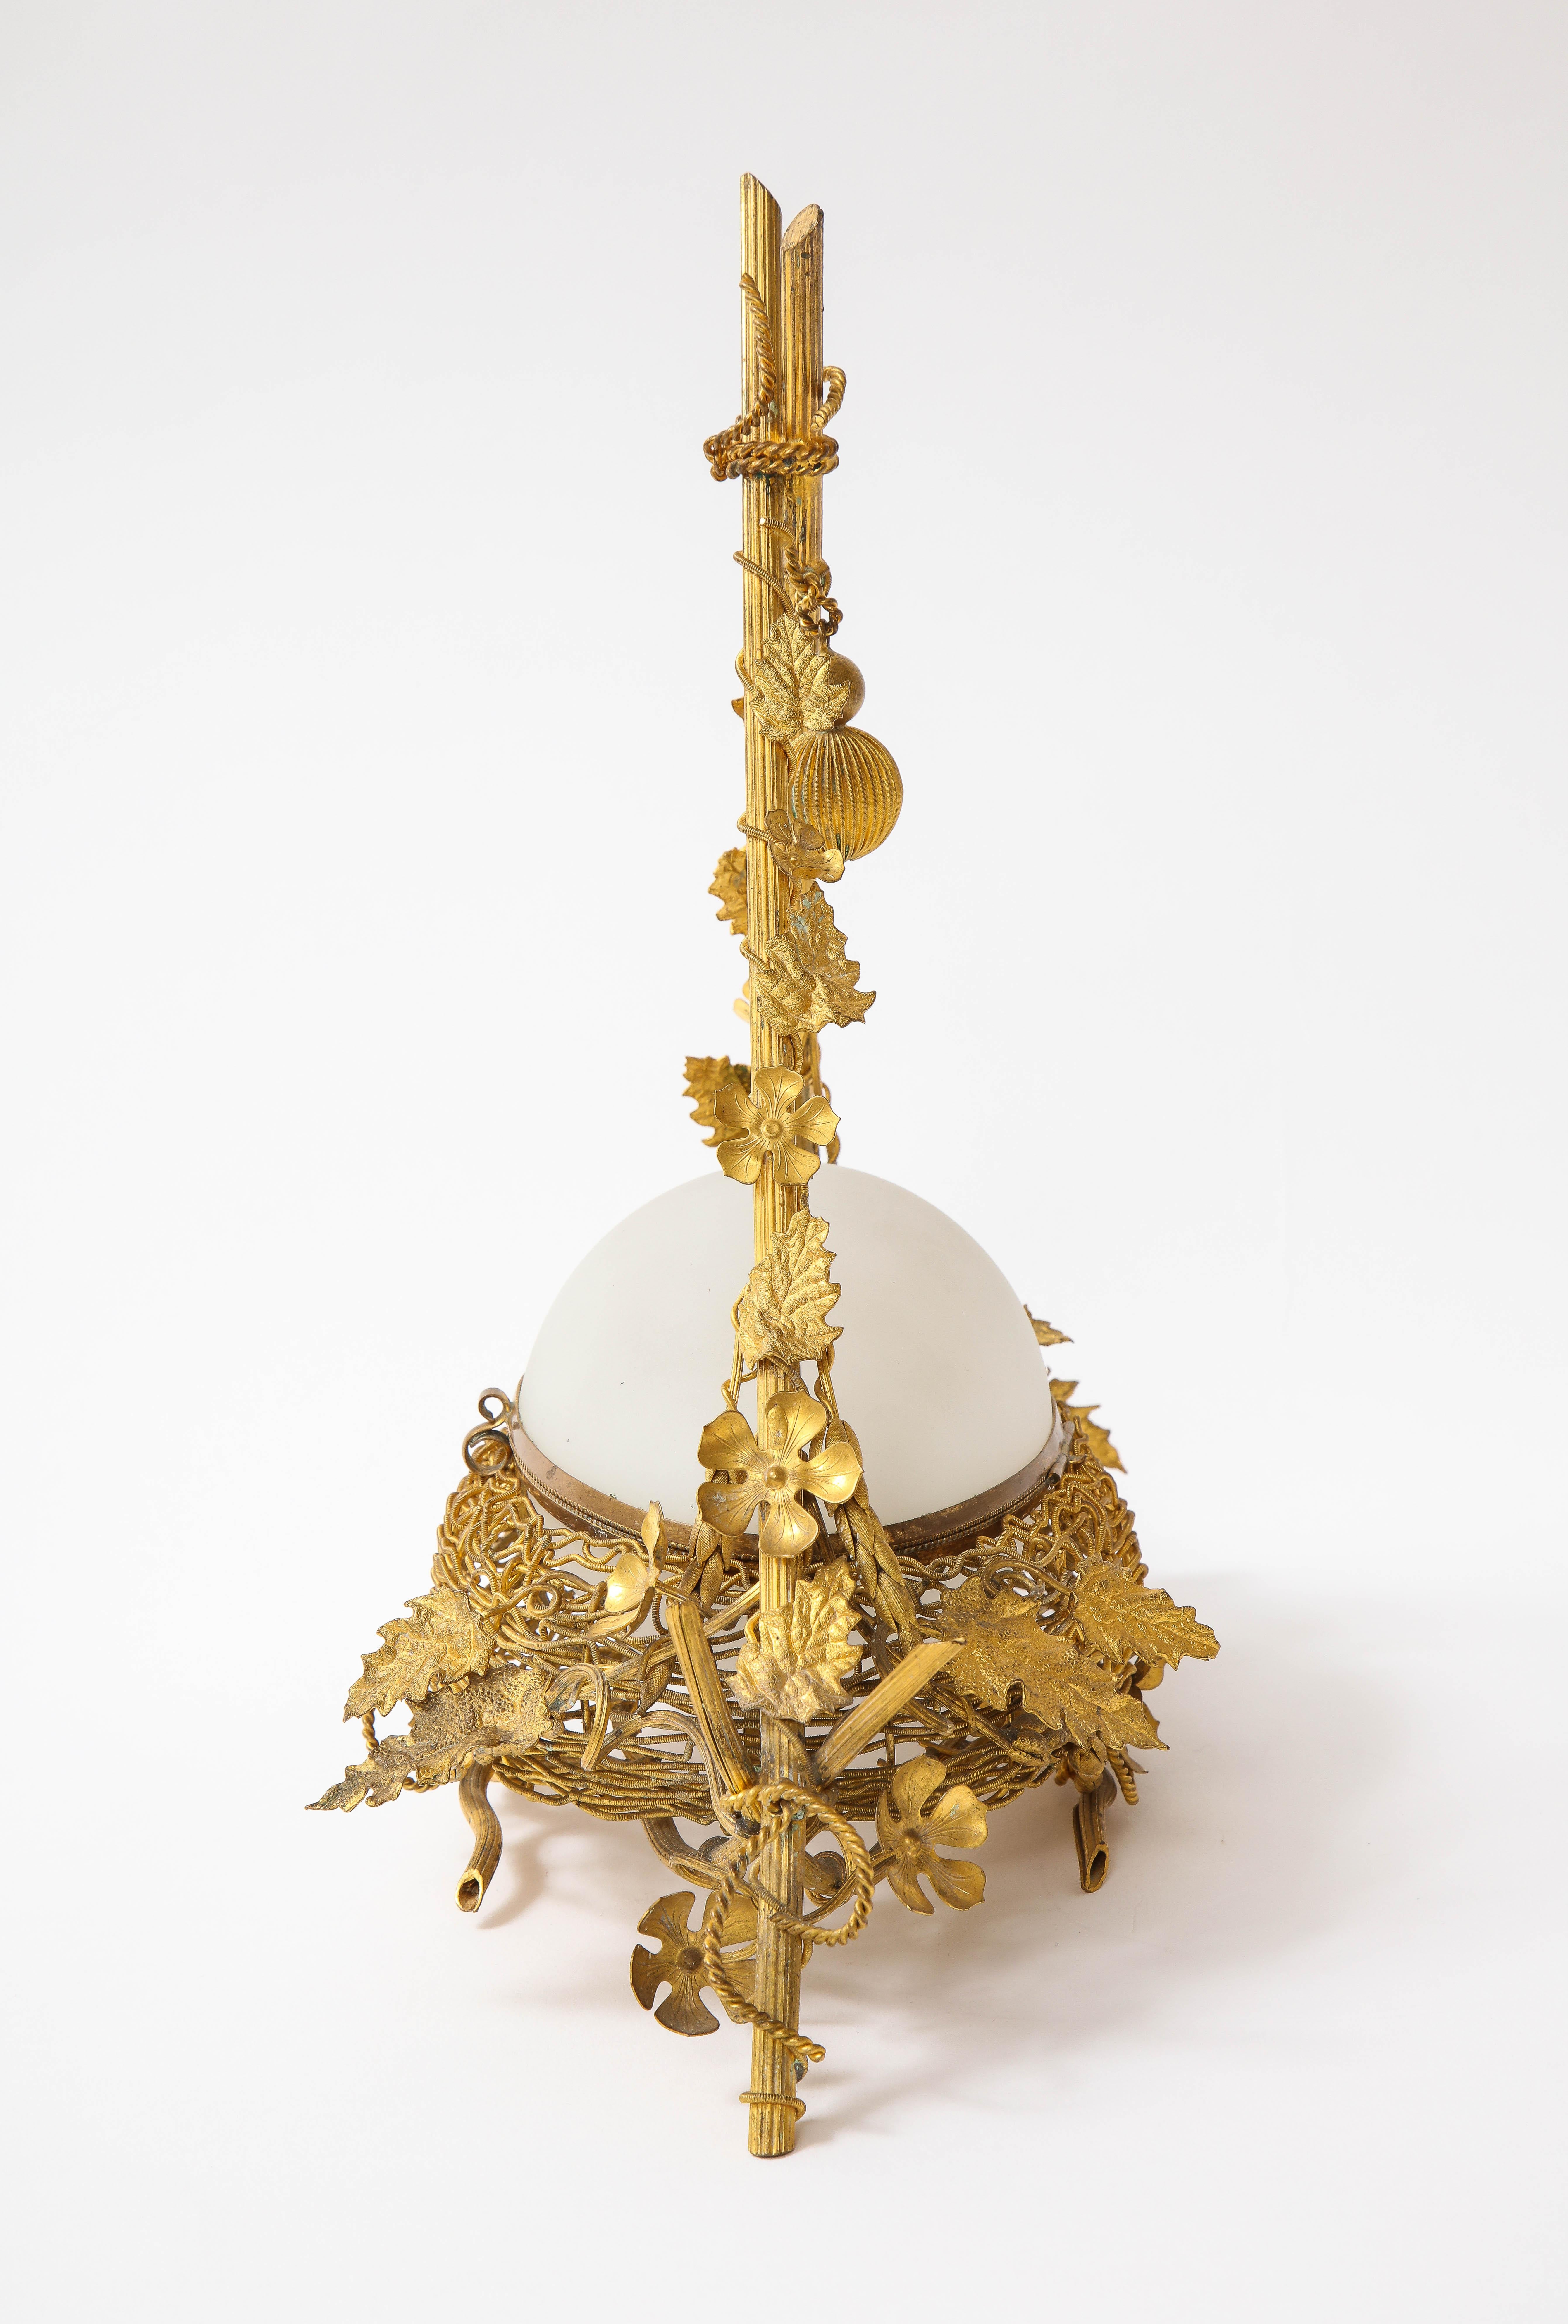 Gilt A 19th C. French Dore Bronze Mounted White Opaline Egg Form Covered Nesting Box For Sale